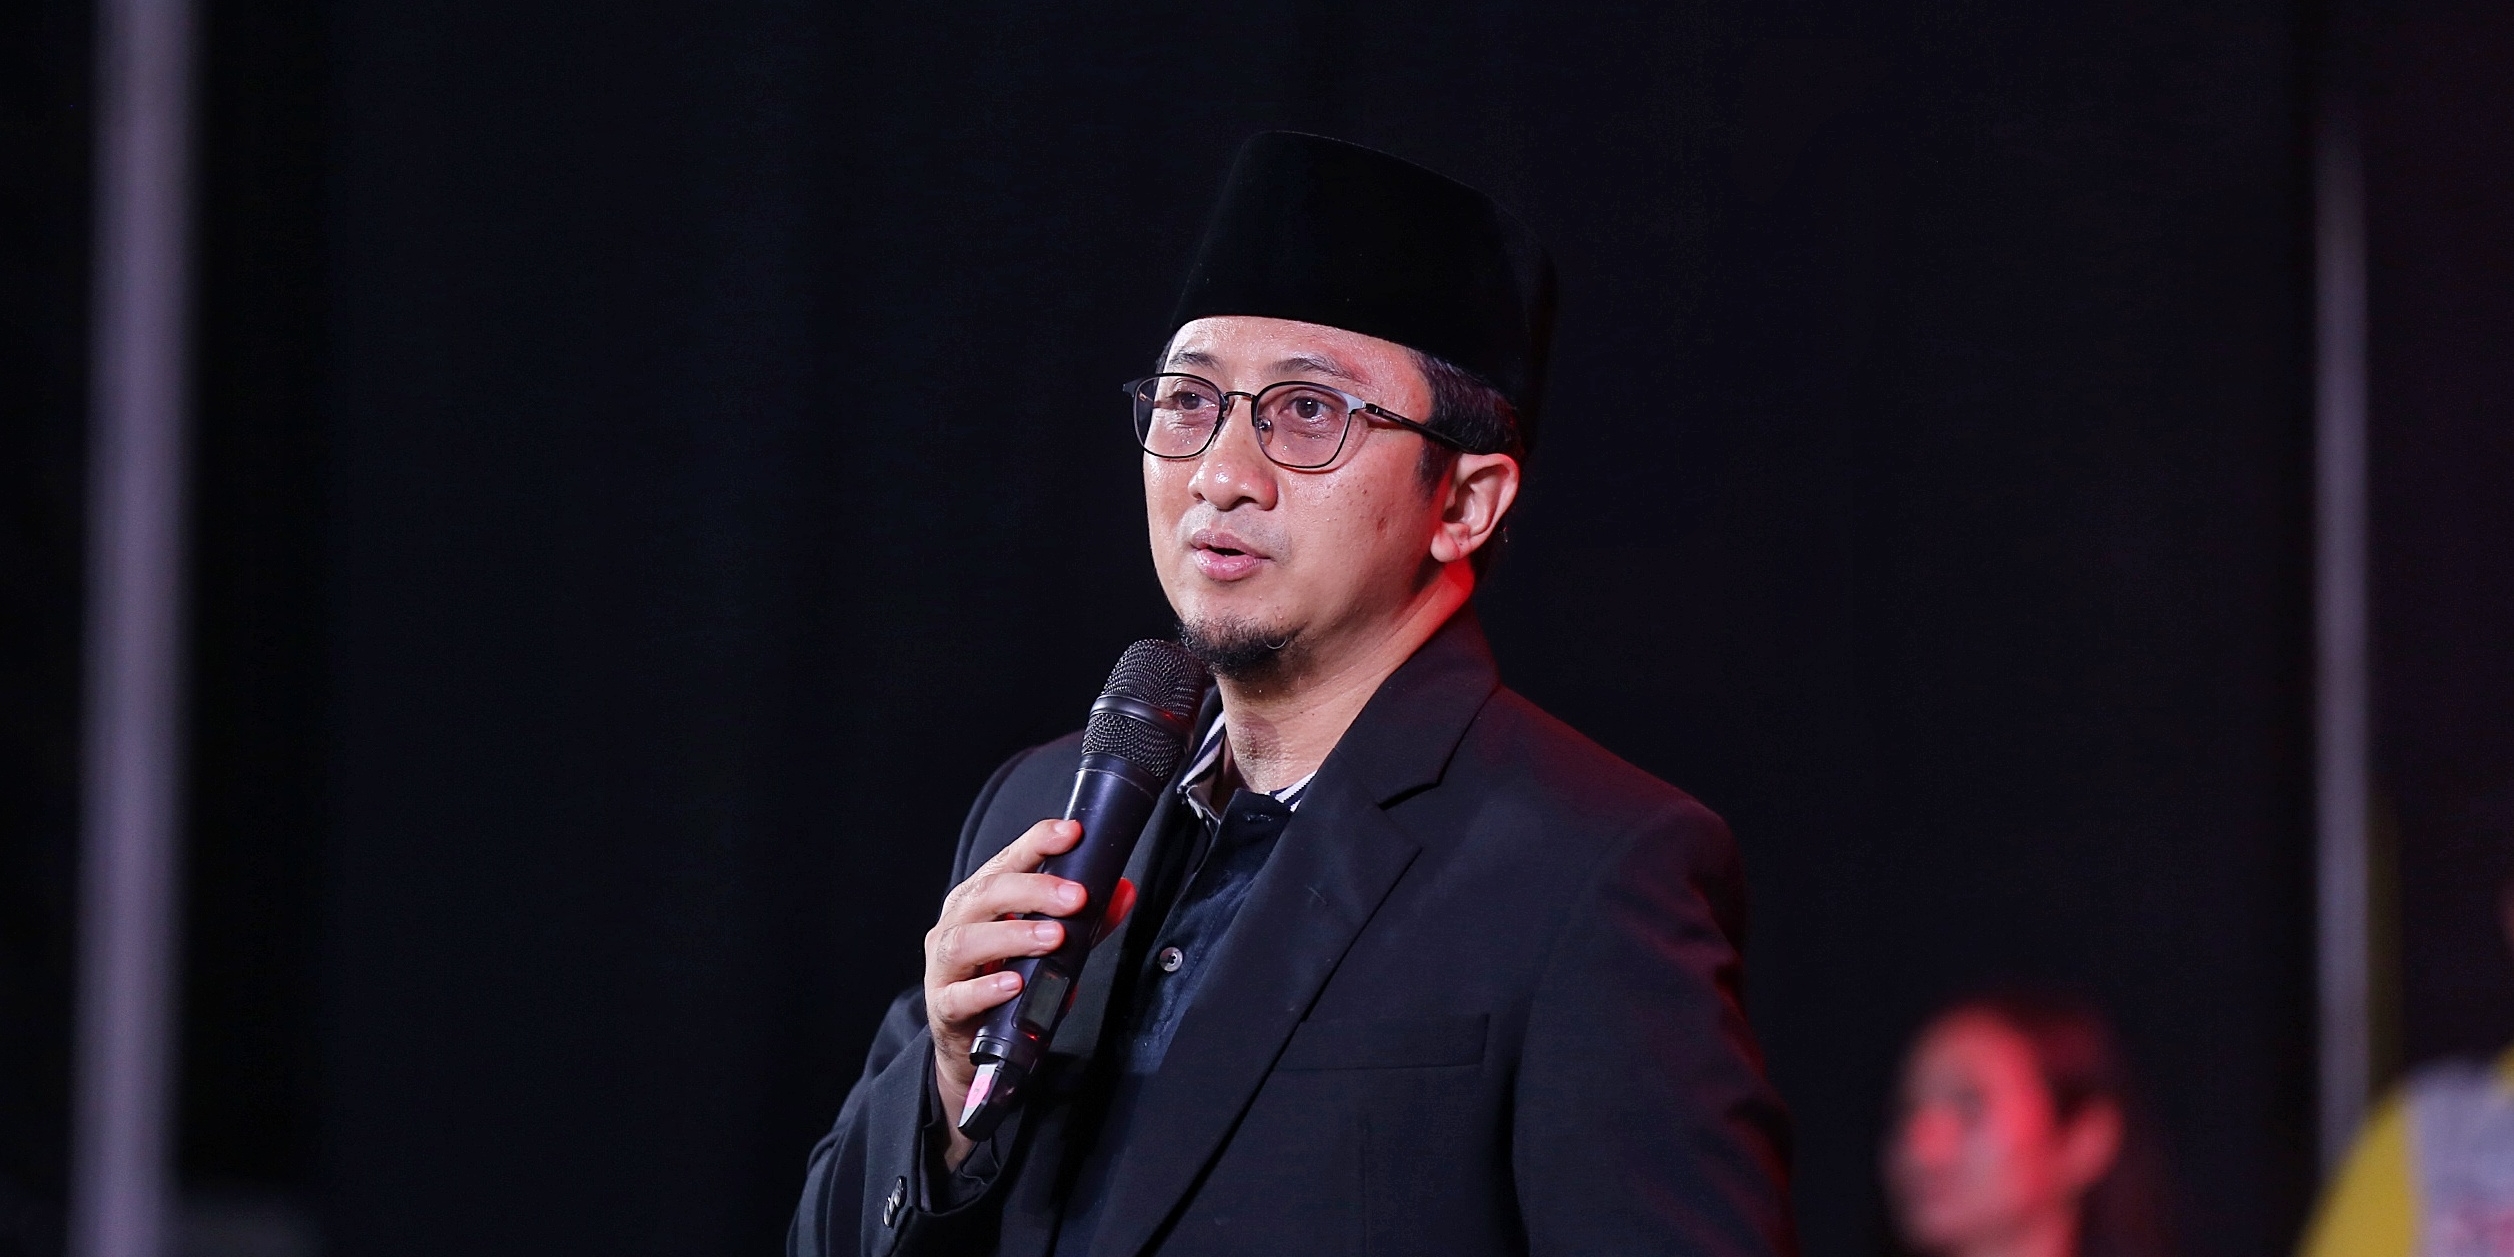 The Rapid Spread of the Corona Virus, Ustaz Yusuf Mansur Admits Many Scheduled Events Must Be Canceled